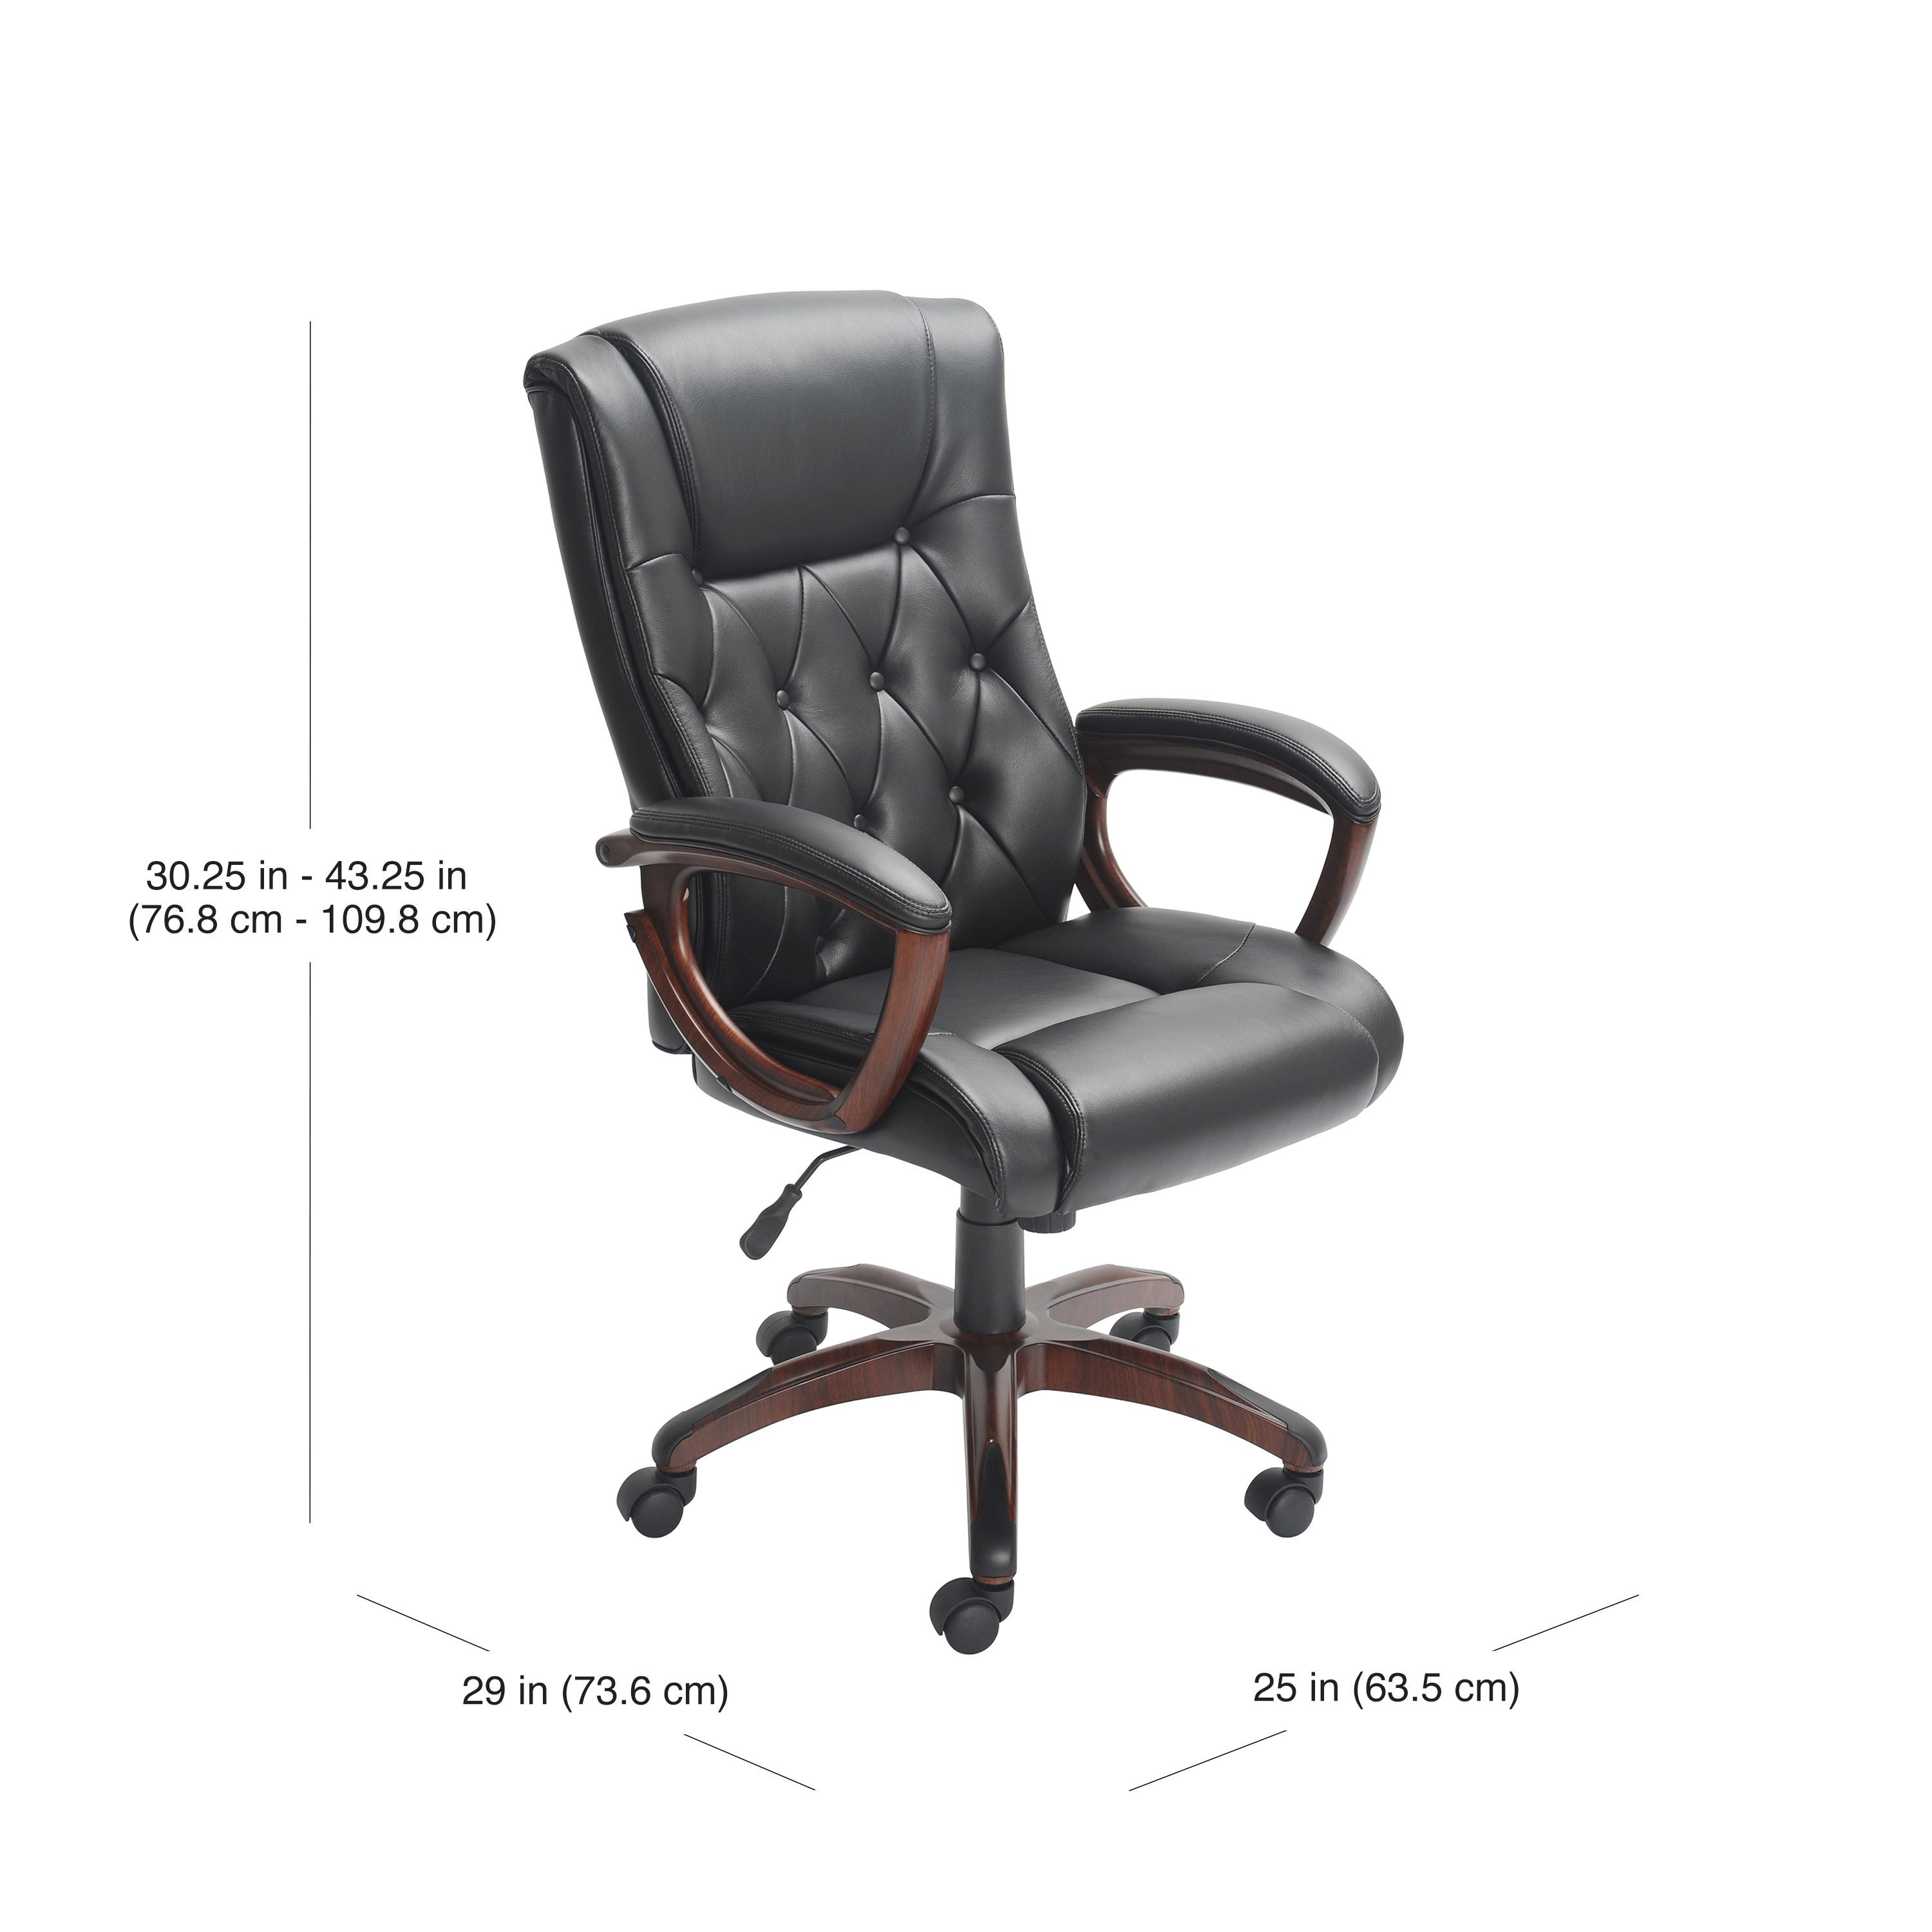 Better Homes and Gardens Executive, Mid-Back Manager's Office Chair with Arms, Black Bonded Leather - image 5 of 9